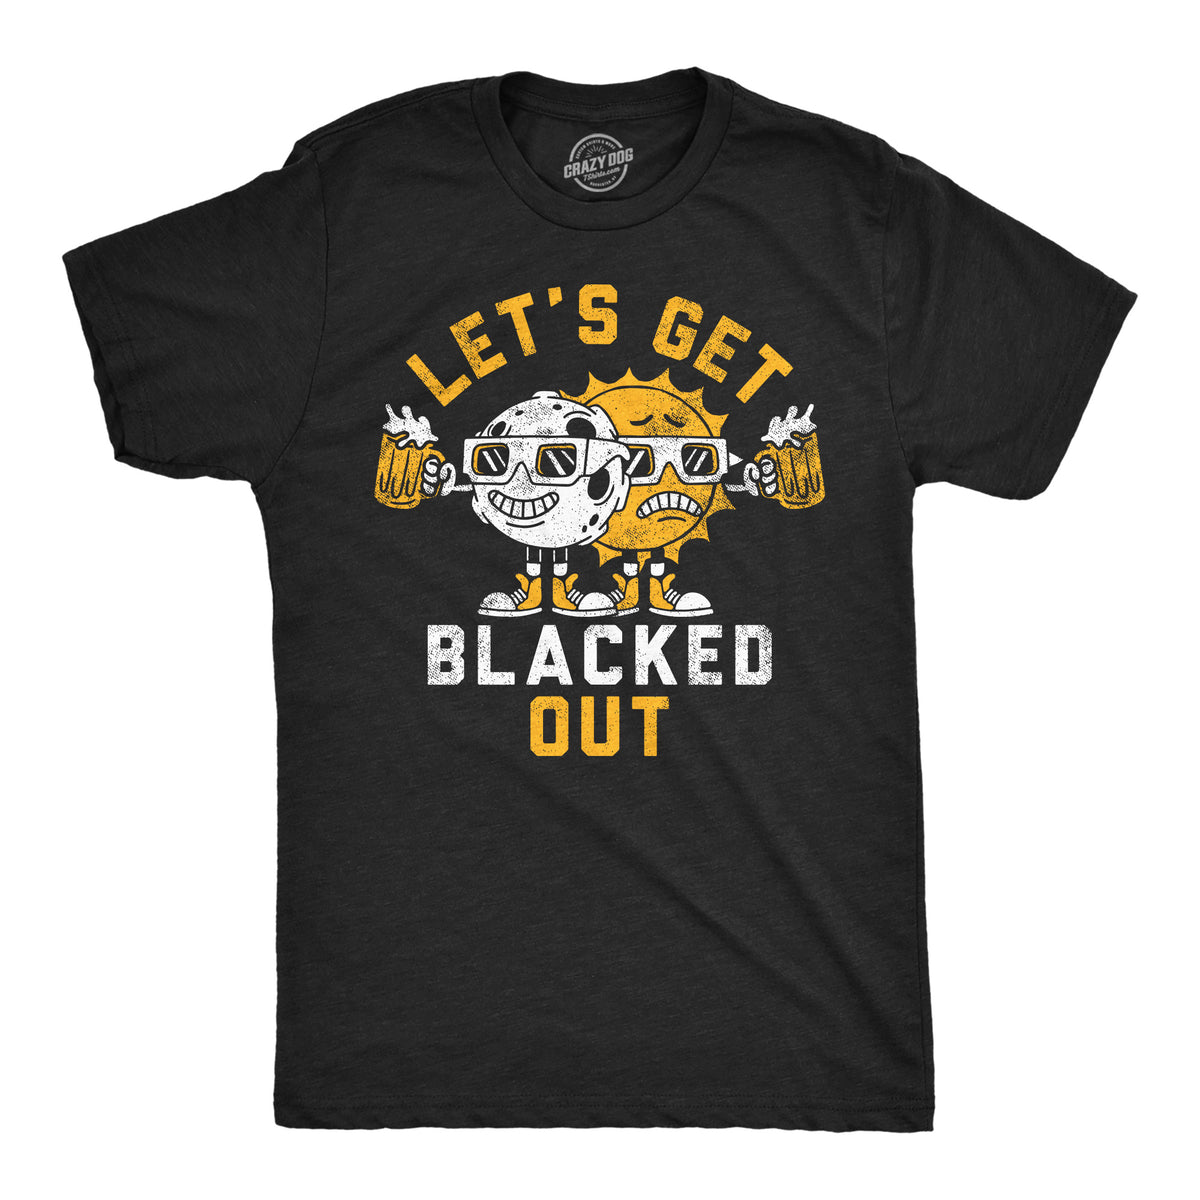 Funny Heather Black - Lets Get Blacked Out Lets Get Blacked Out Mens T Shirt Nerdy Drinking space sarcastic Tee